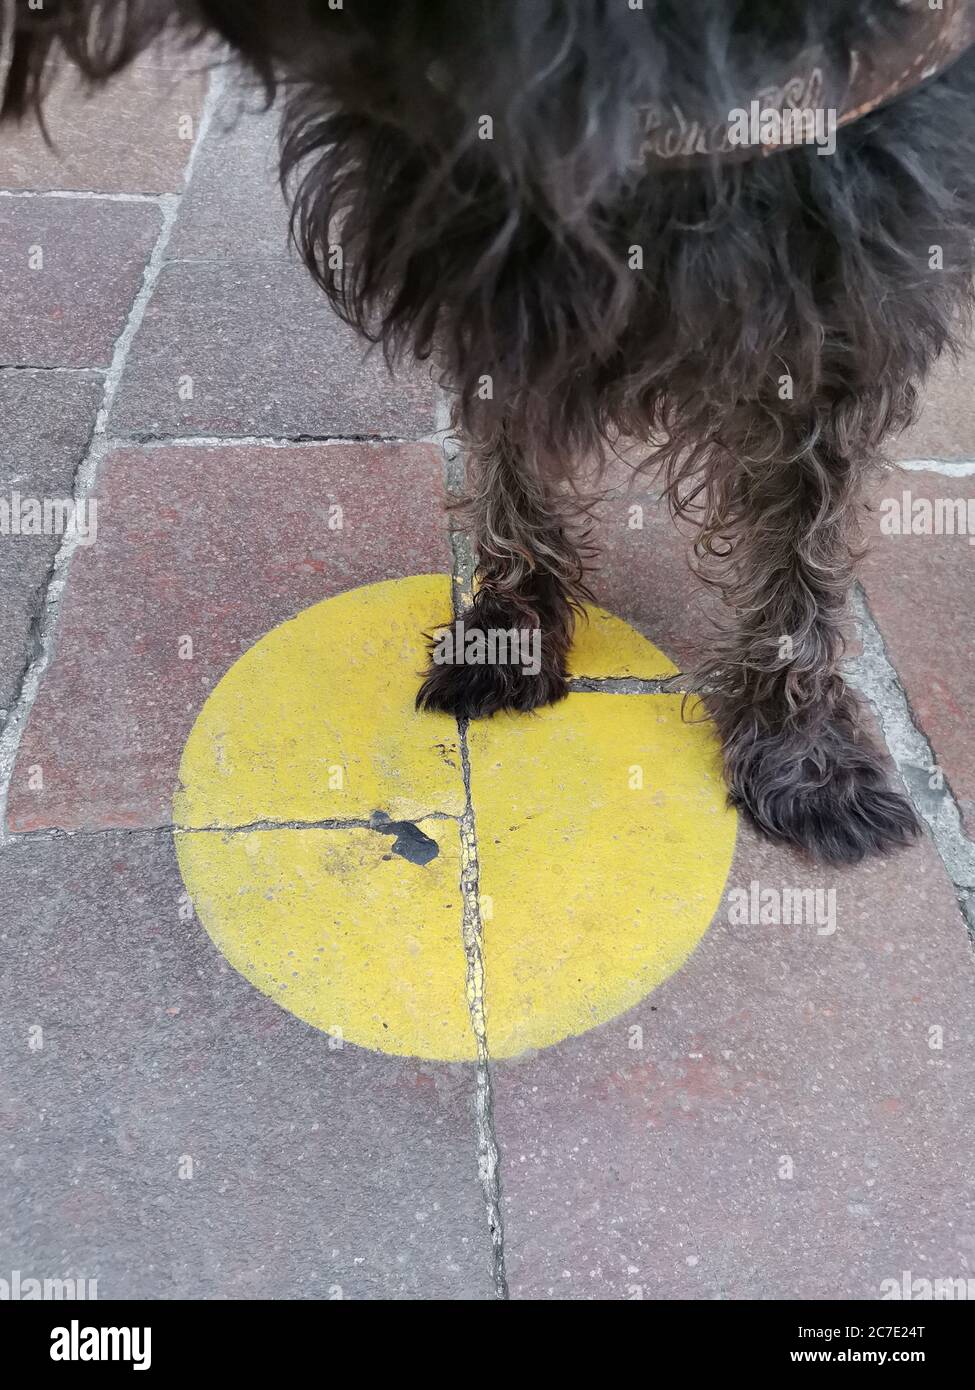 Dog queueing on floor marking for social distance funny moment Stock Photo